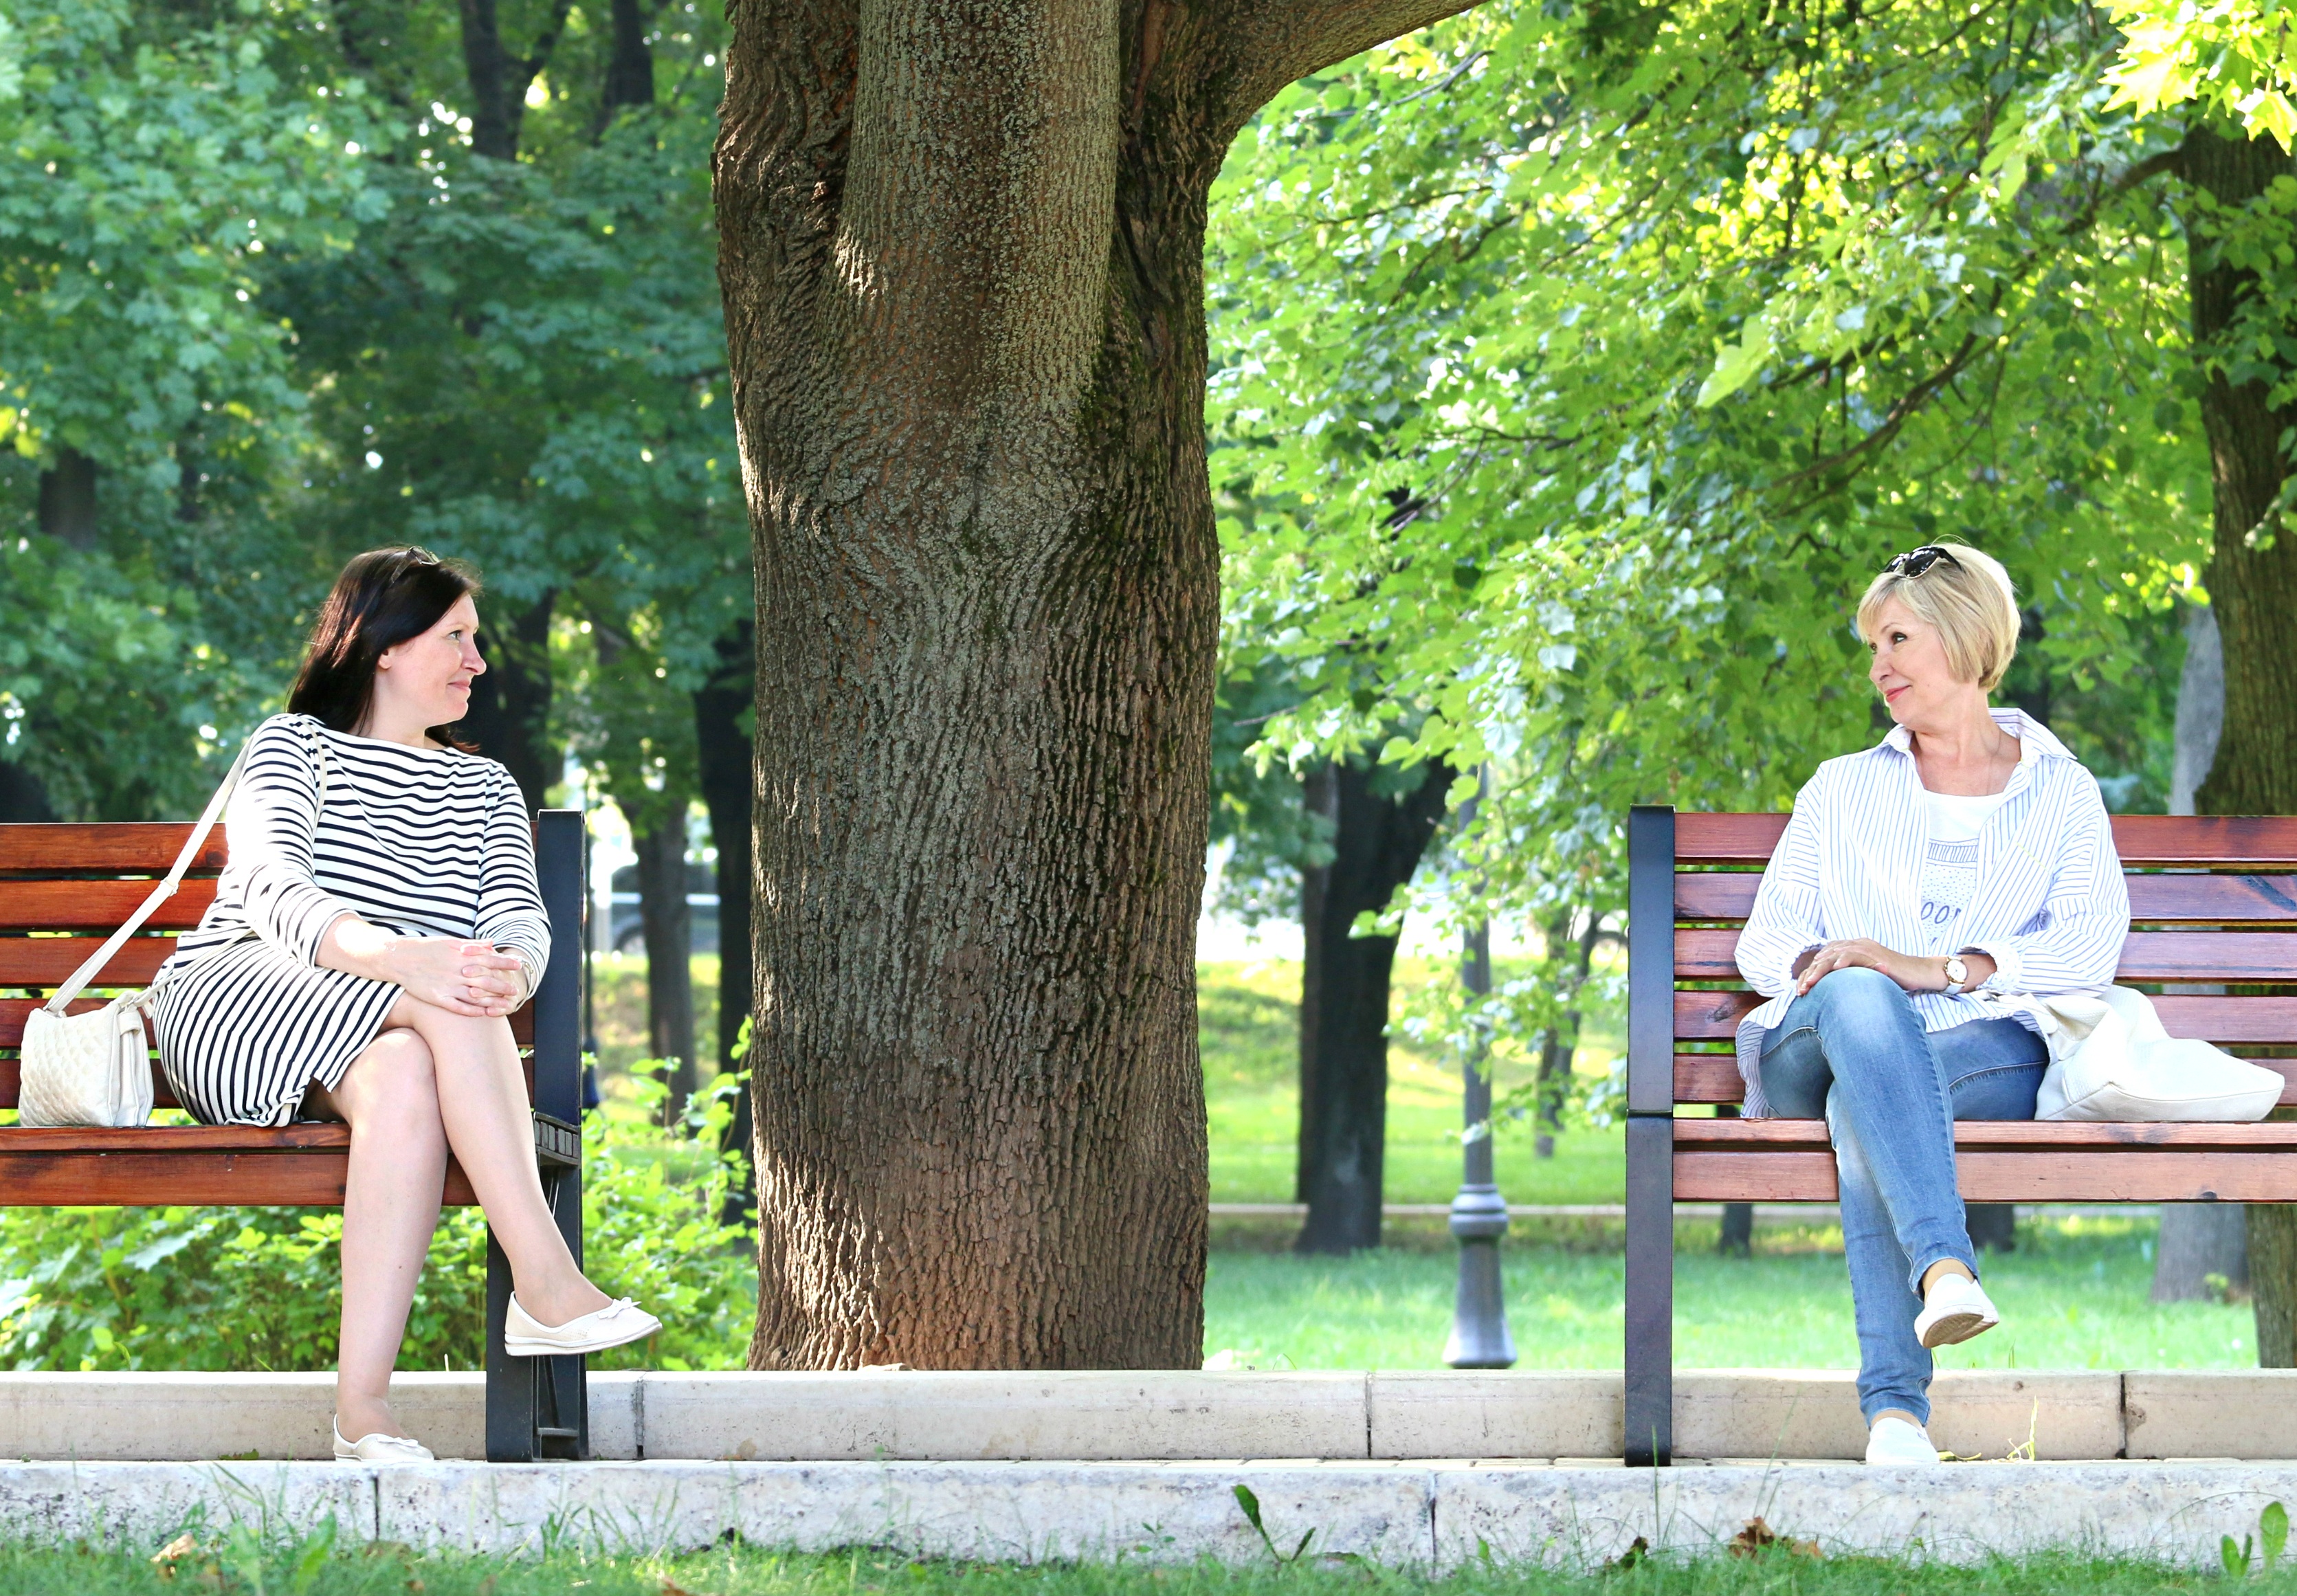 Two women sitting on different park benches are smiling at each other